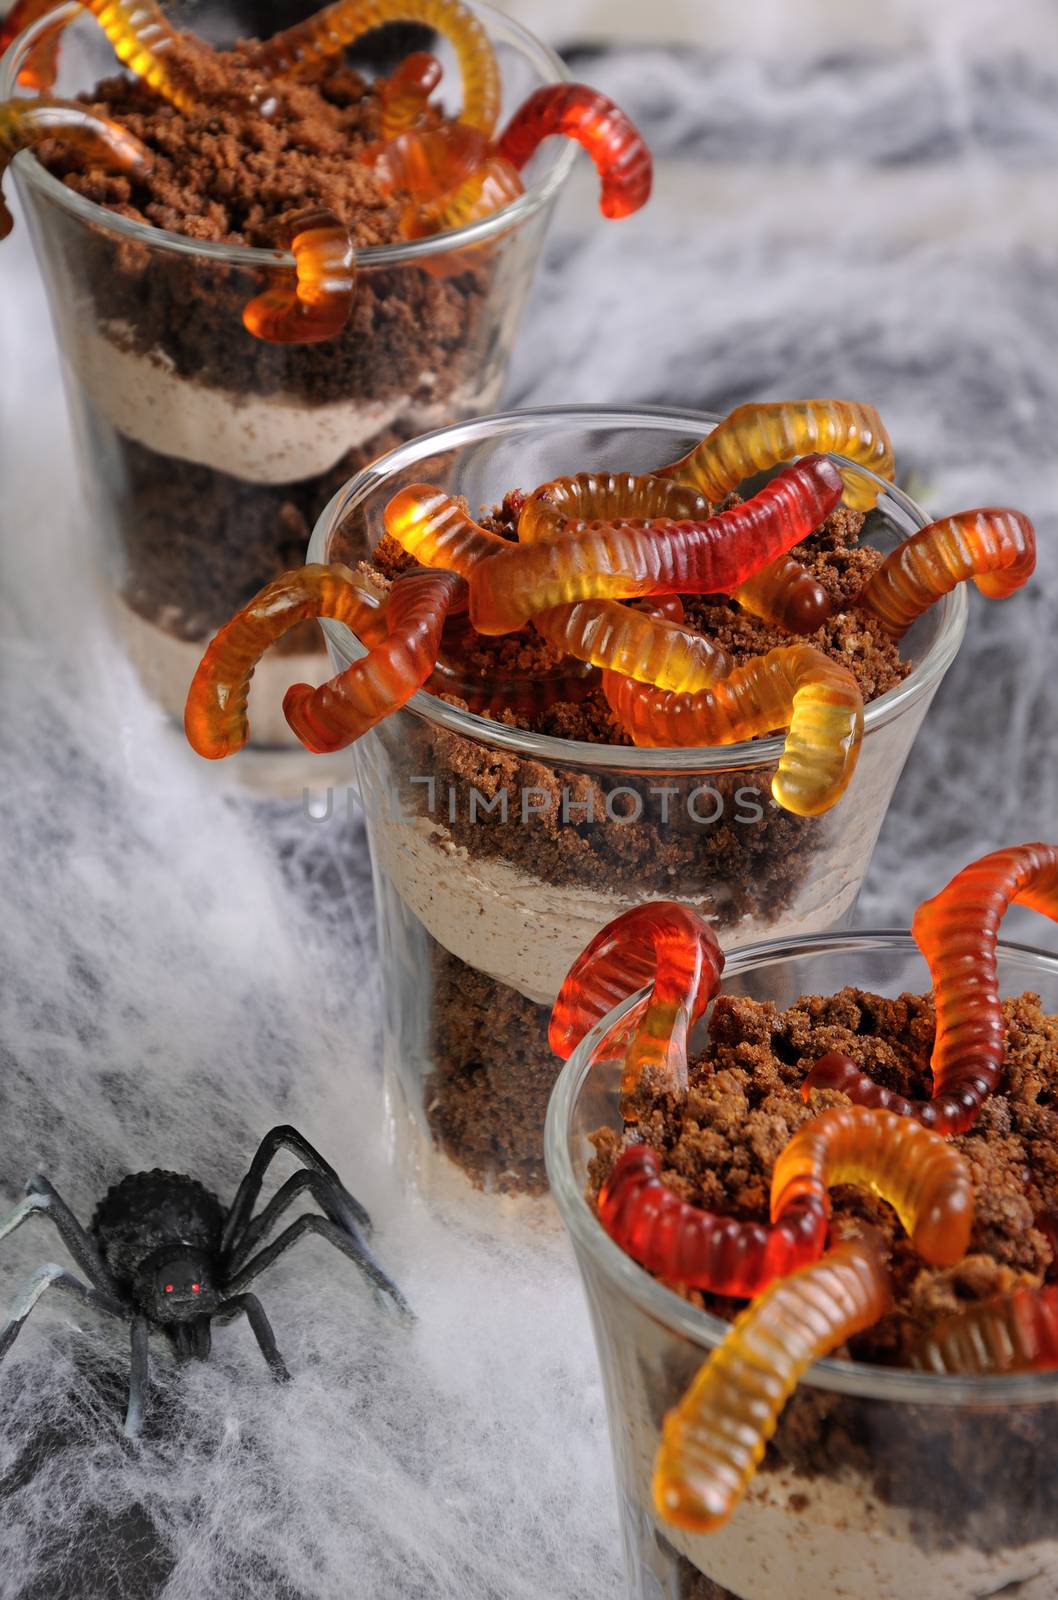 Dessert of chocolate sponge cake with cream and jelly worms